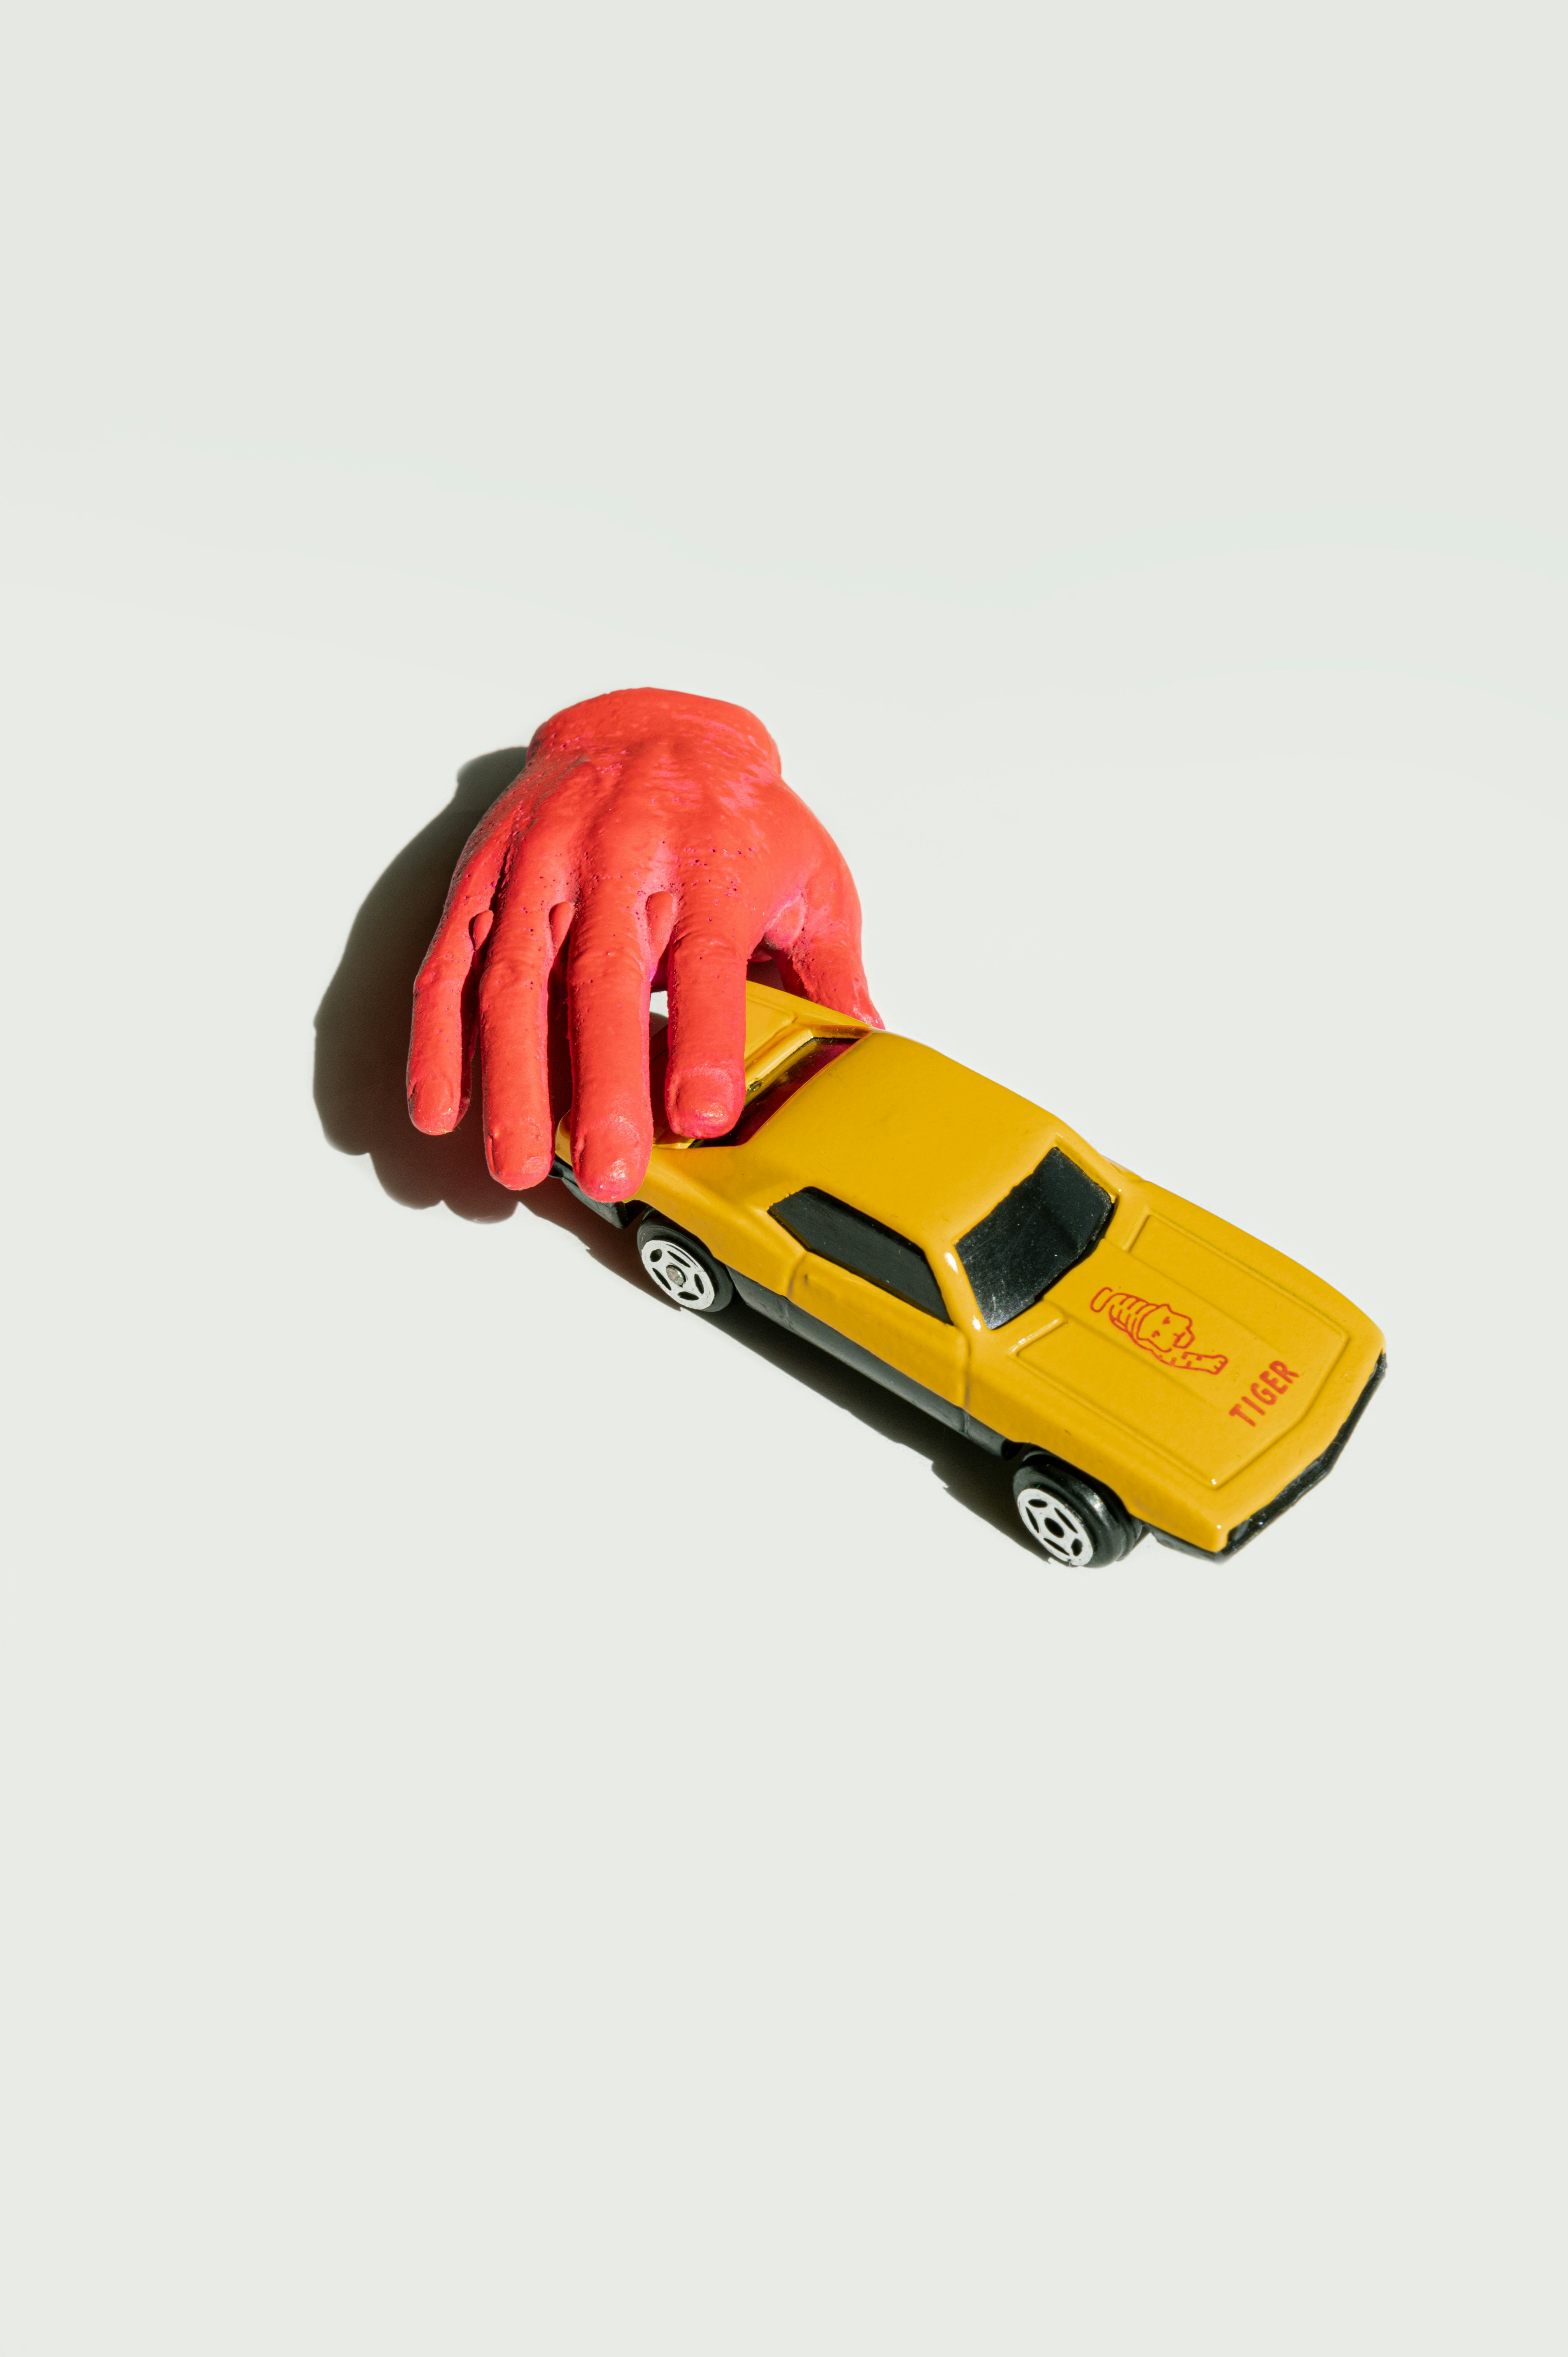 Die-cast car on white background and pink neon hand